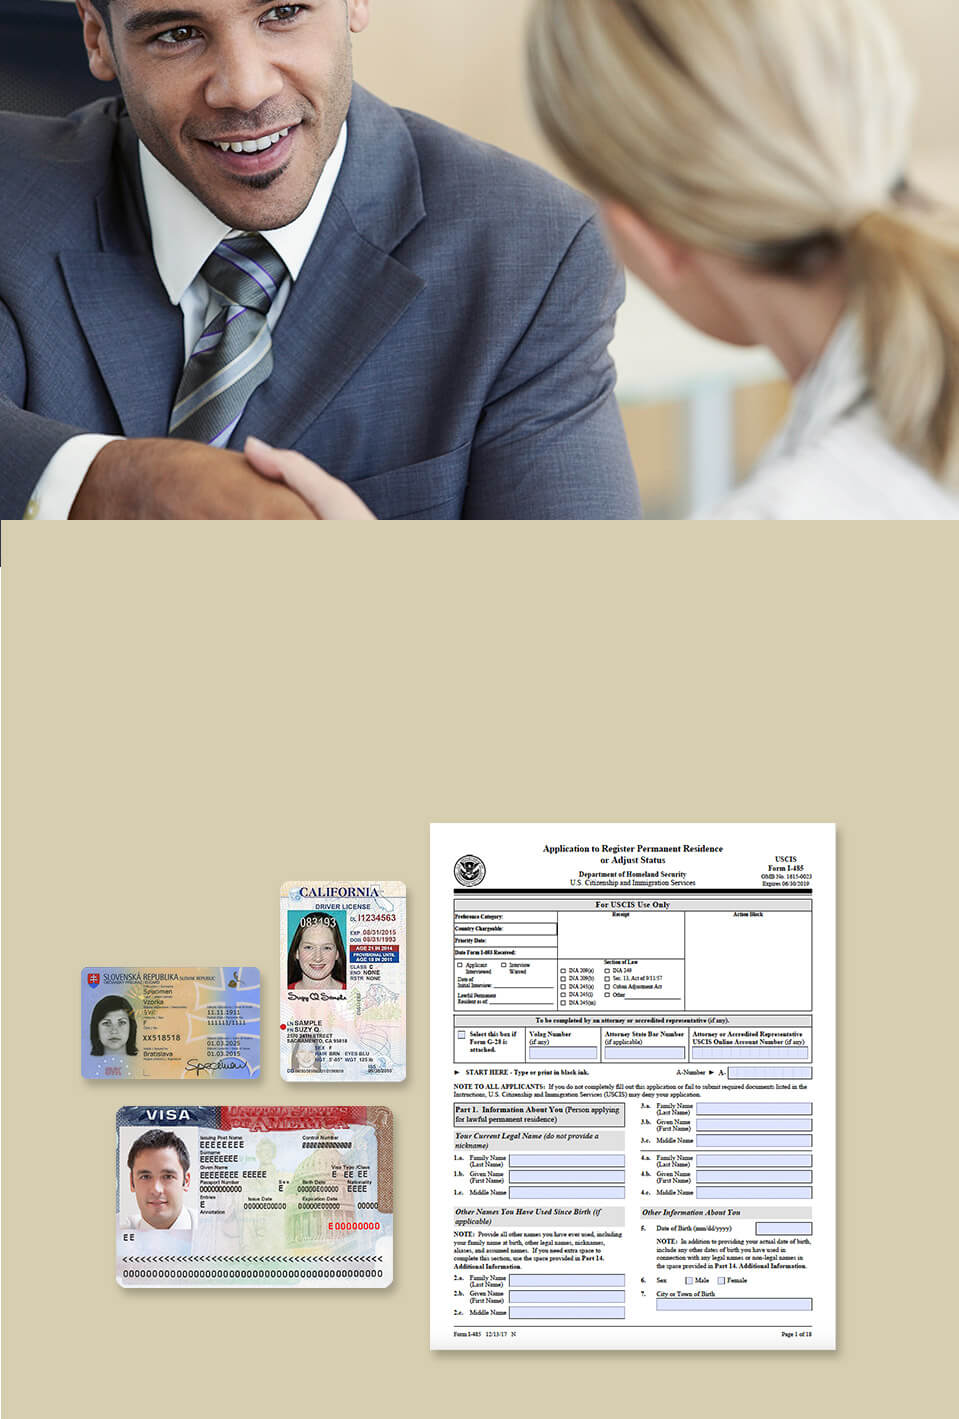 Scan required documents to one folder or save as a batch,Scan ID Card, Driving license and application at once